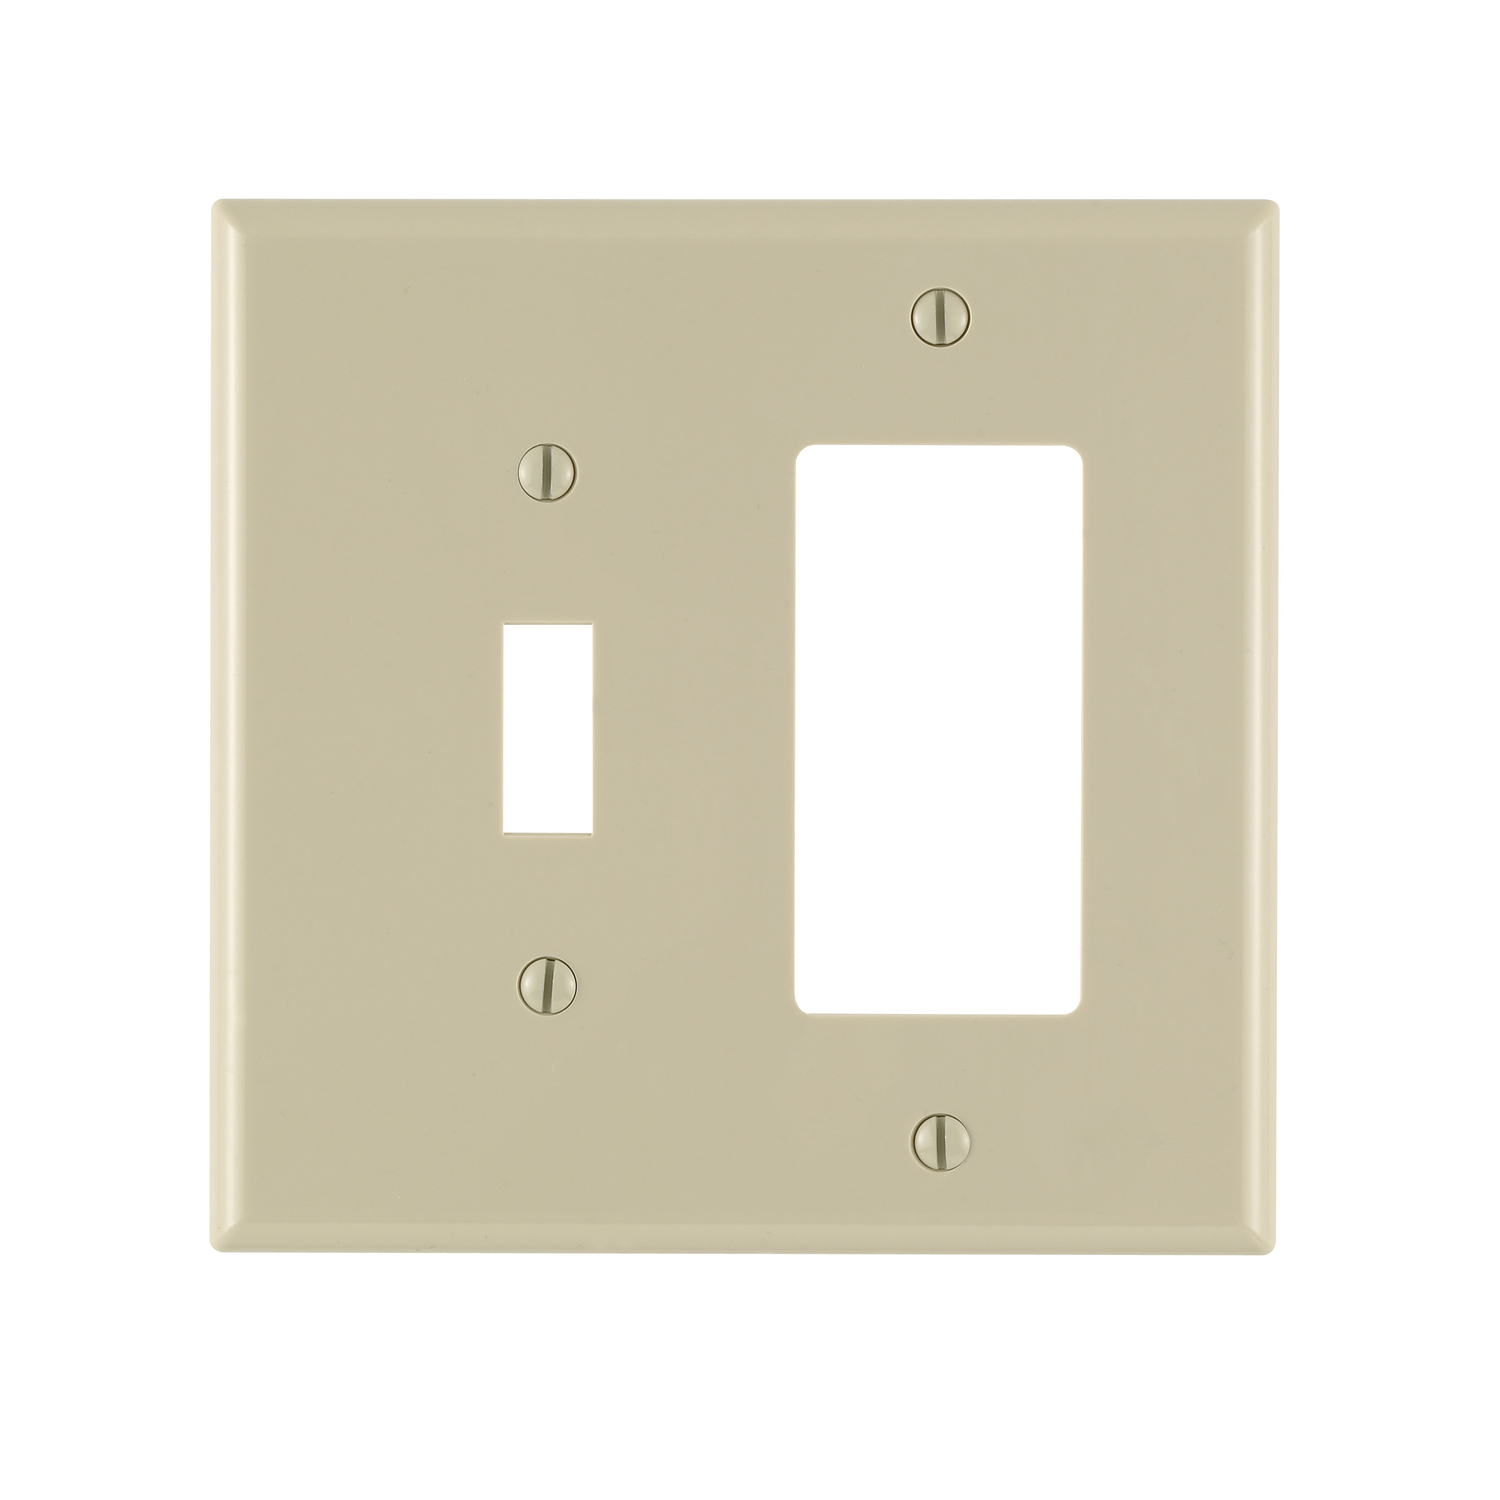 Photos - Household Switch Leviton Midway Ivory 2 gang Thermoplastic Nylon Decorator/Toggle Wall Plat 